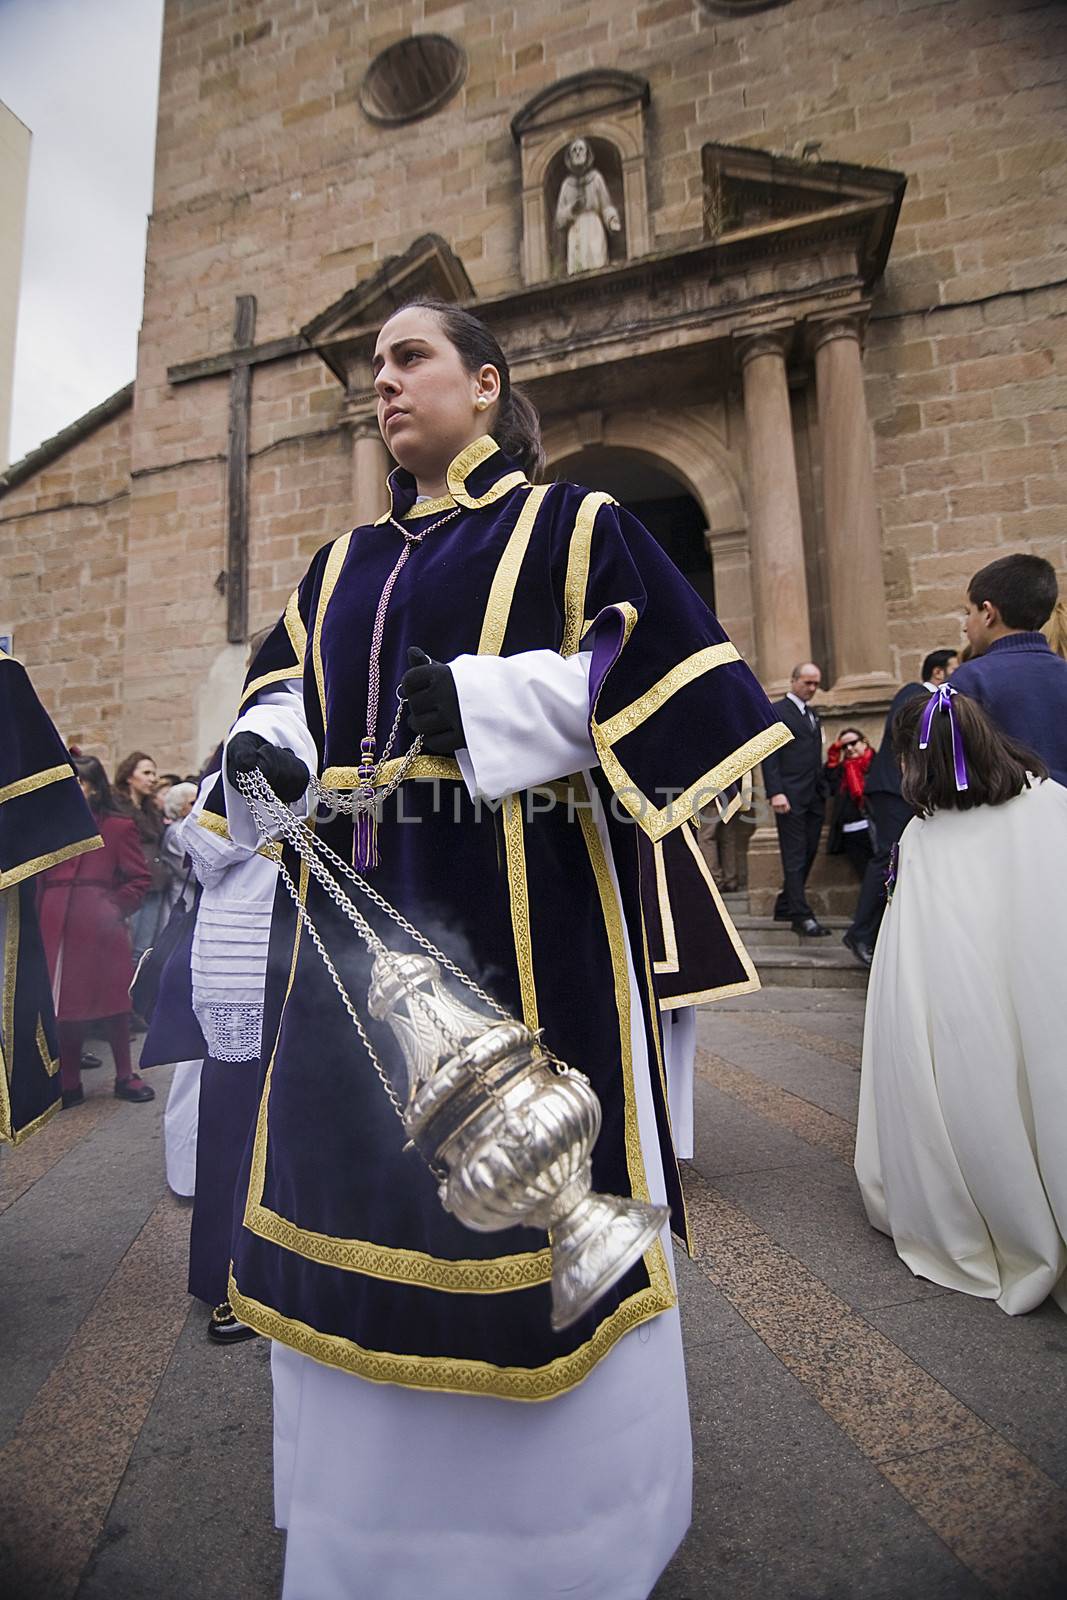 Young people in procession with incense burners in Holy week, Spain